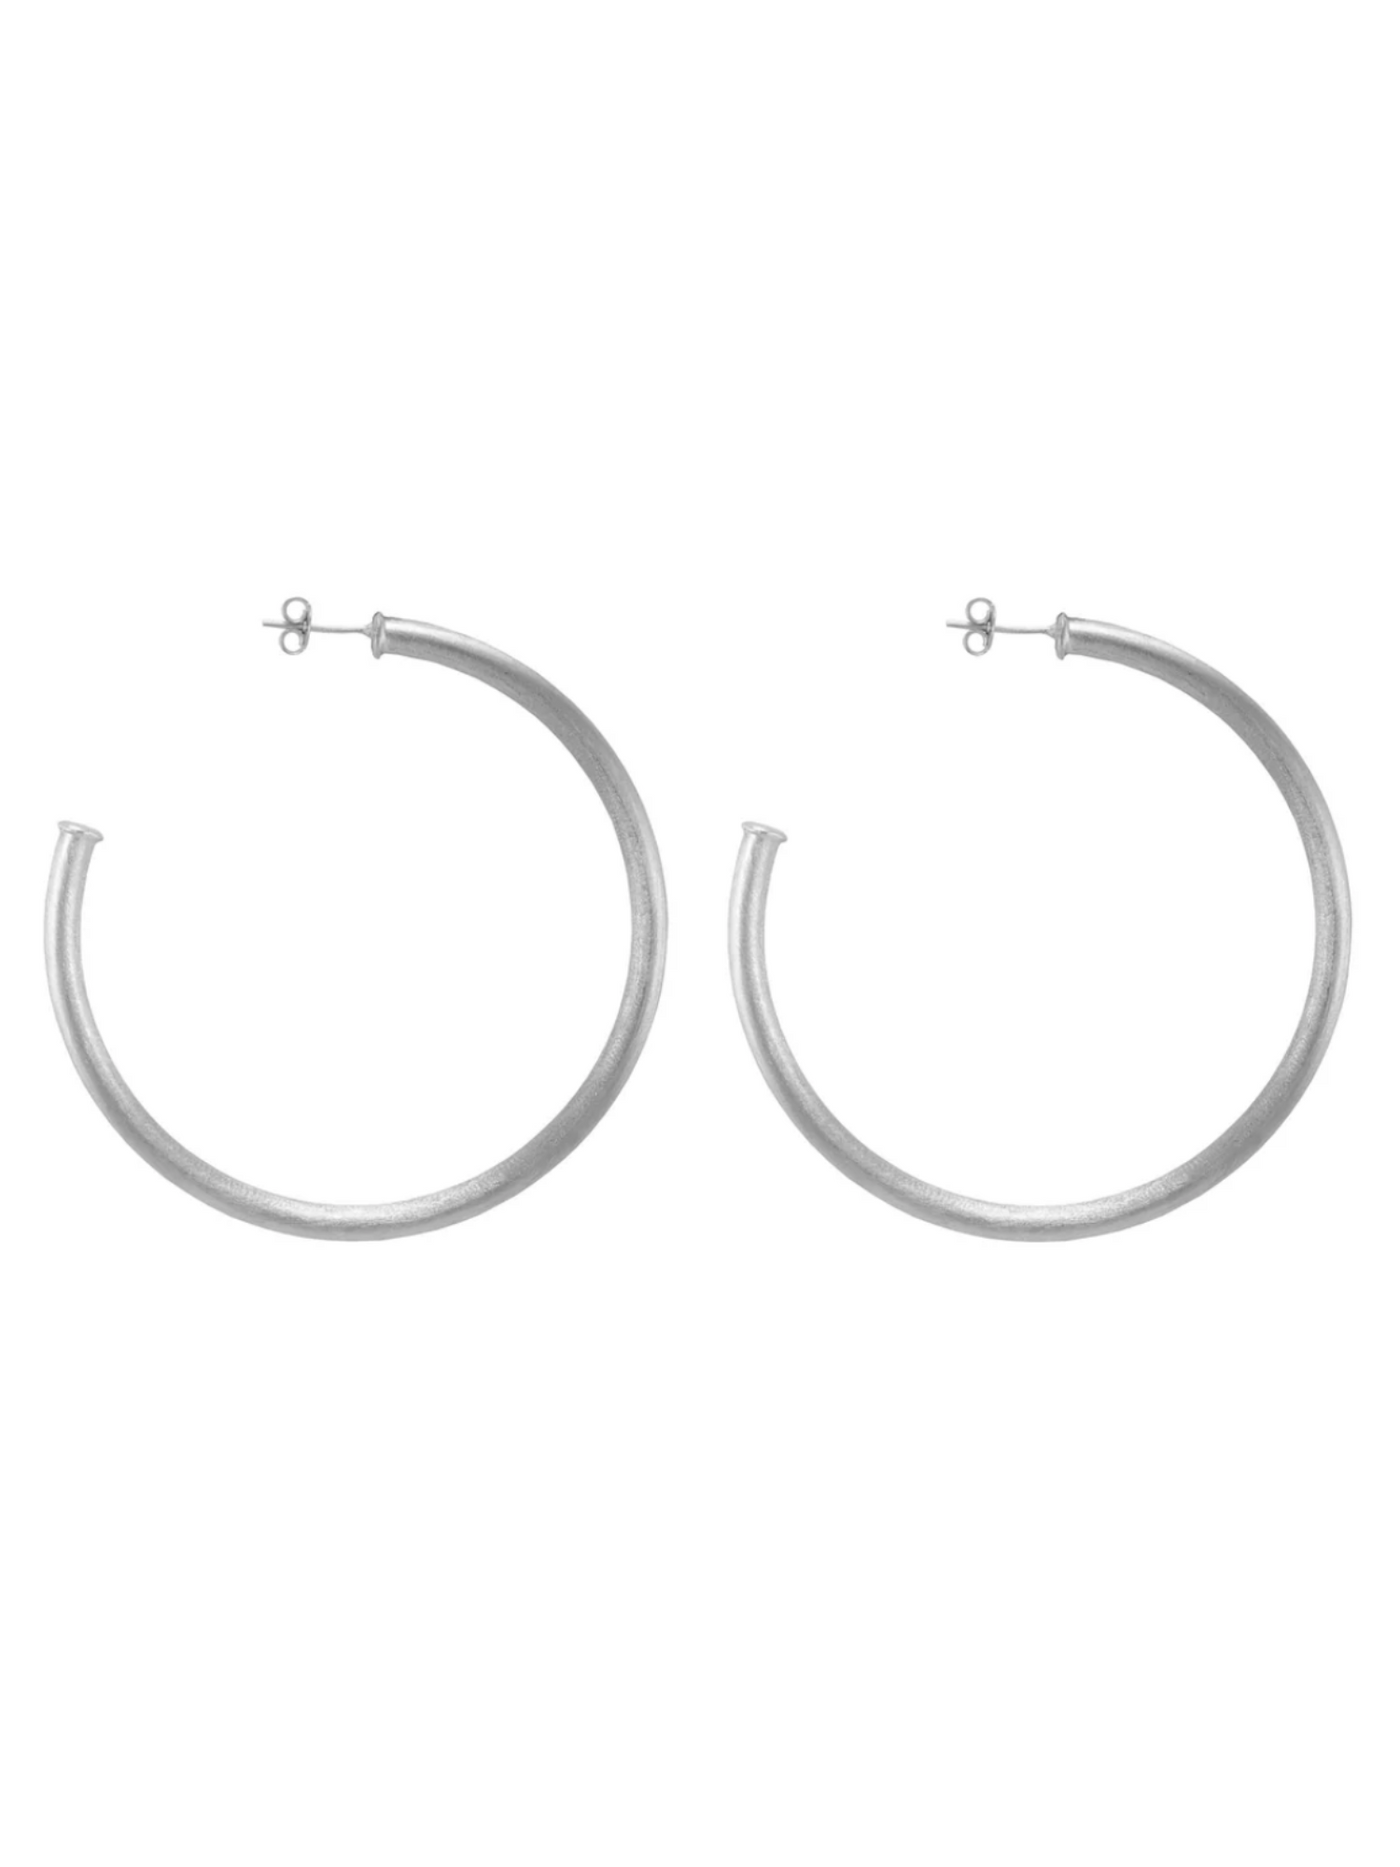 Shelia Fajl Everybody's Favorite Hoops in brushed Silver on white background.